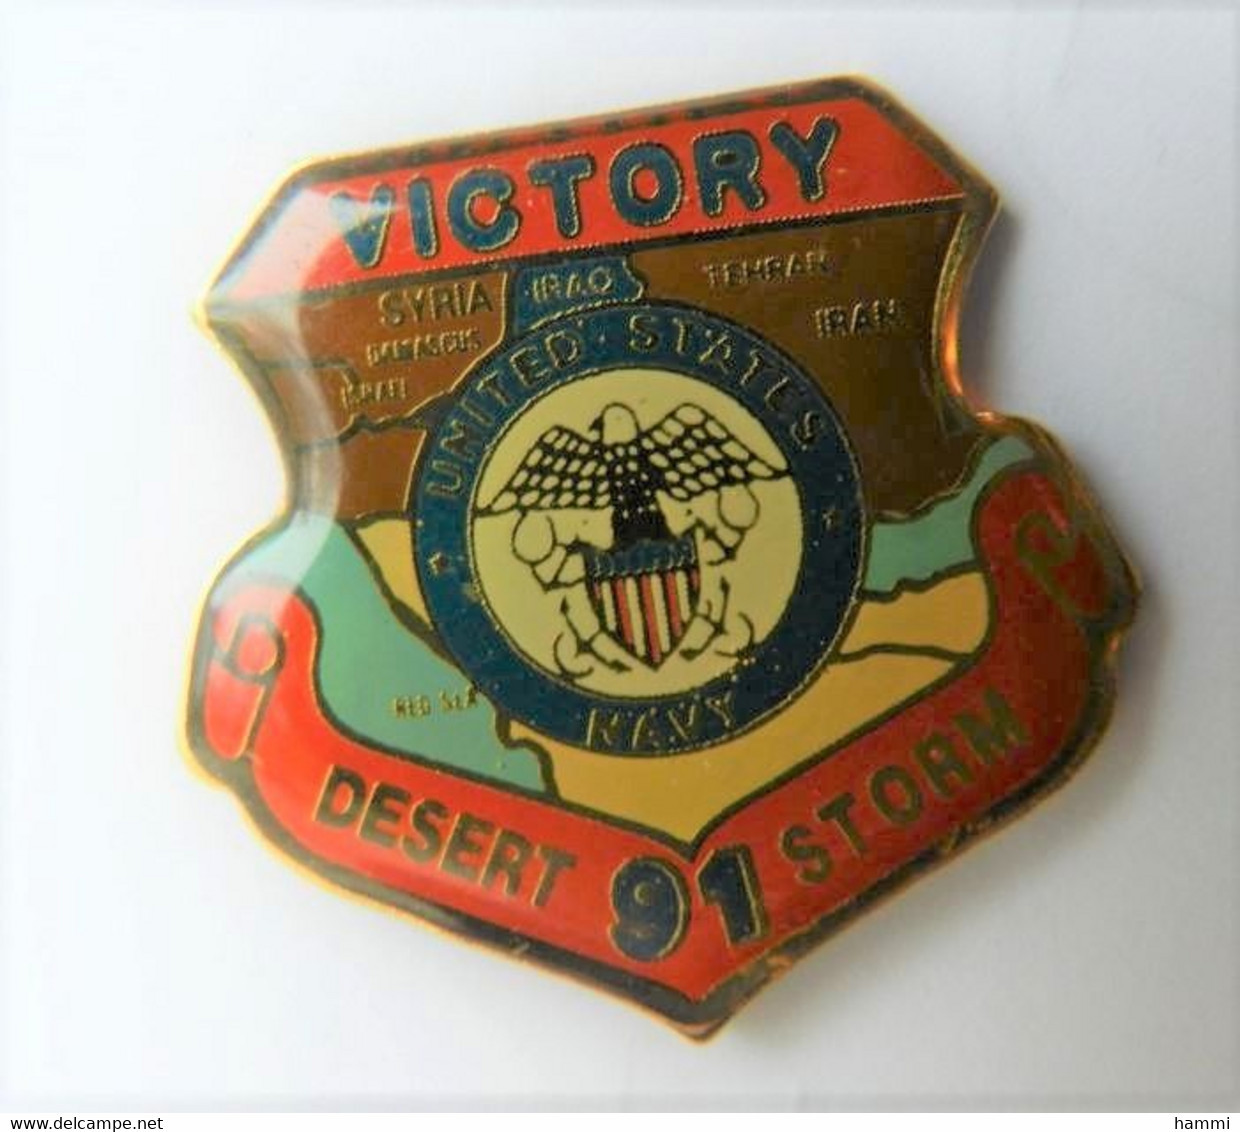 HH42 Pin's Guerre Du Golf War Kuwait Koweït IRAK US ARMY Désert Storm  Victory 91 In The Gulf Achat Immédiat - Army